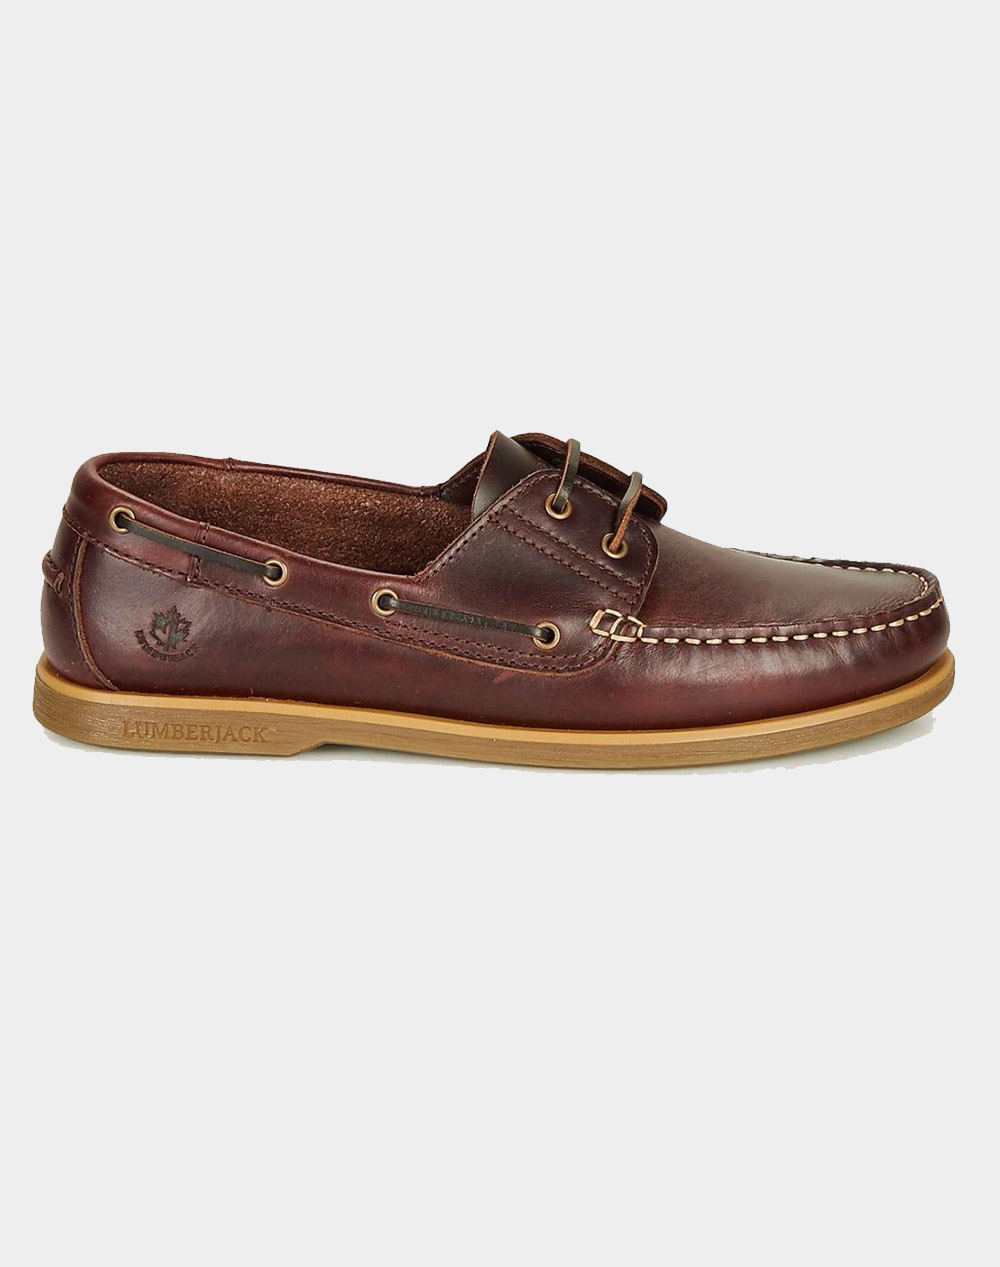 LUMBERJACK MAIN NAVIGATOR BOAT SHOES PULL-UP LEATHER MEN’S SHOES